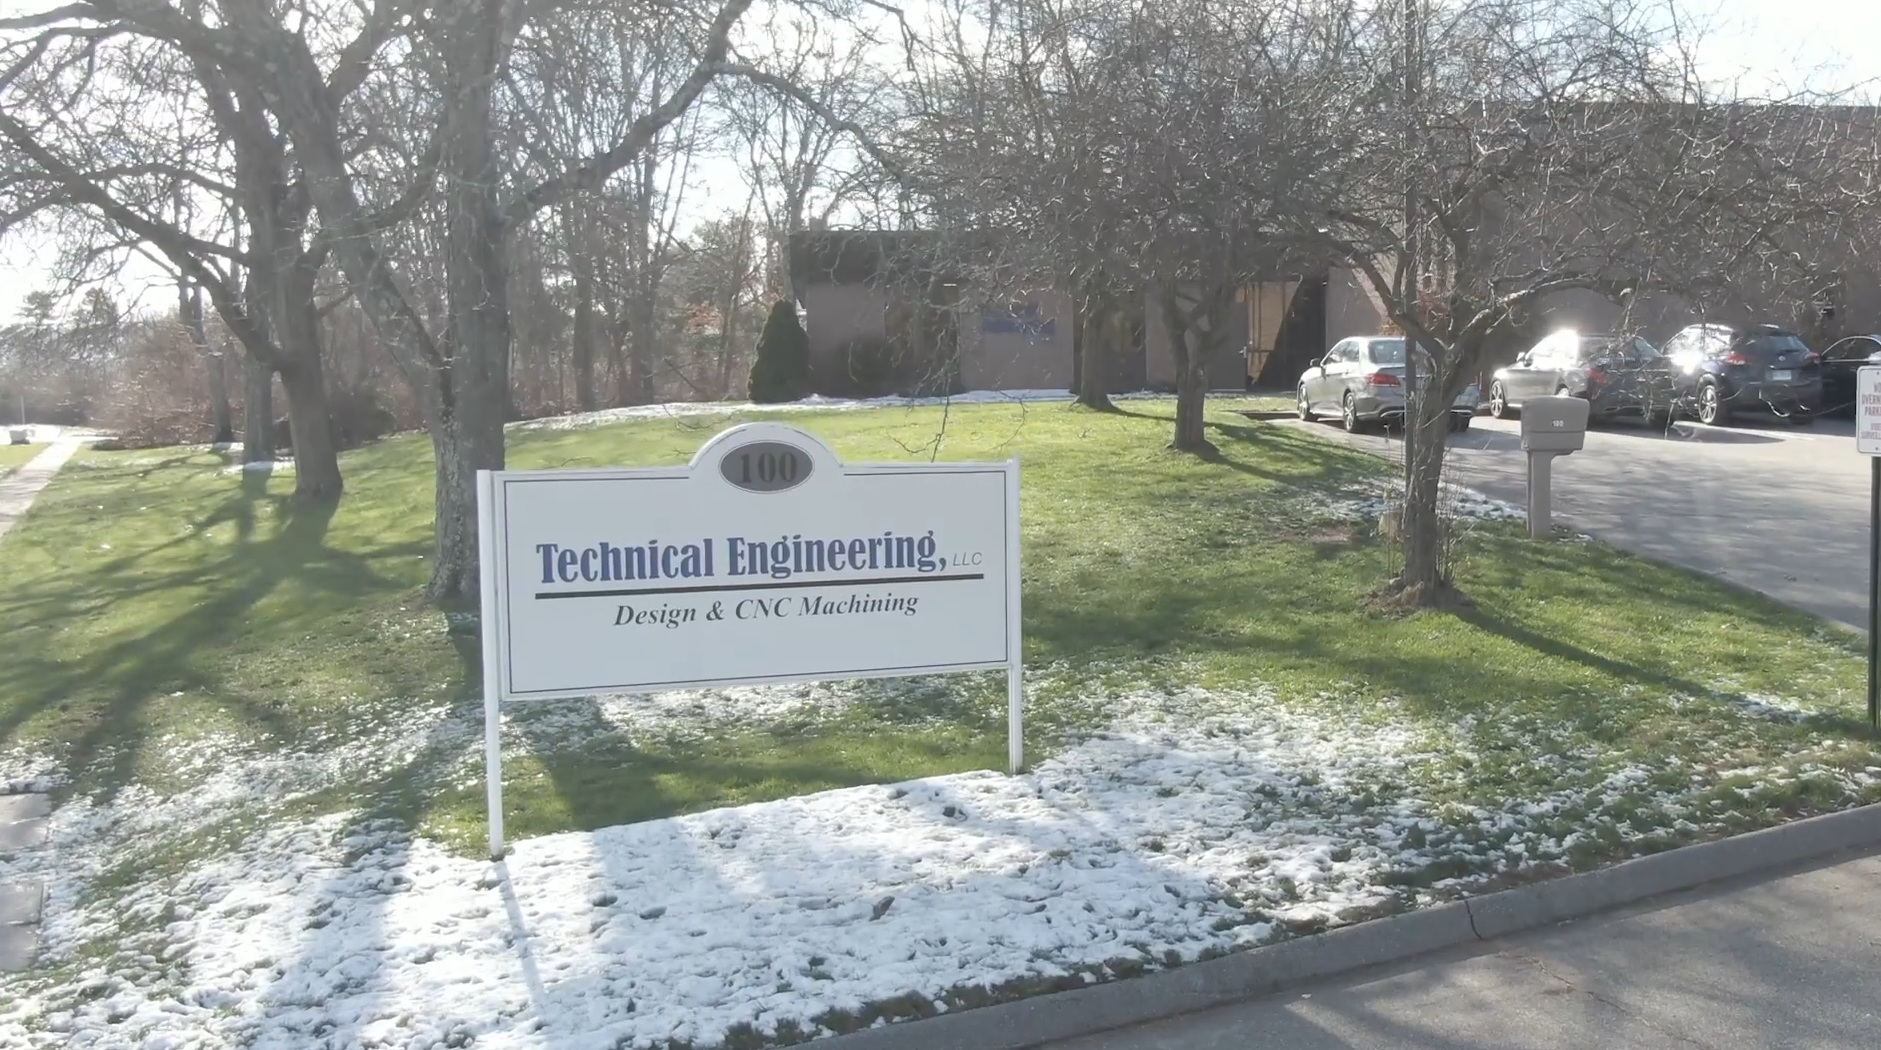 Technical Engineering commitment in Manchester, CT. CNC Maching.